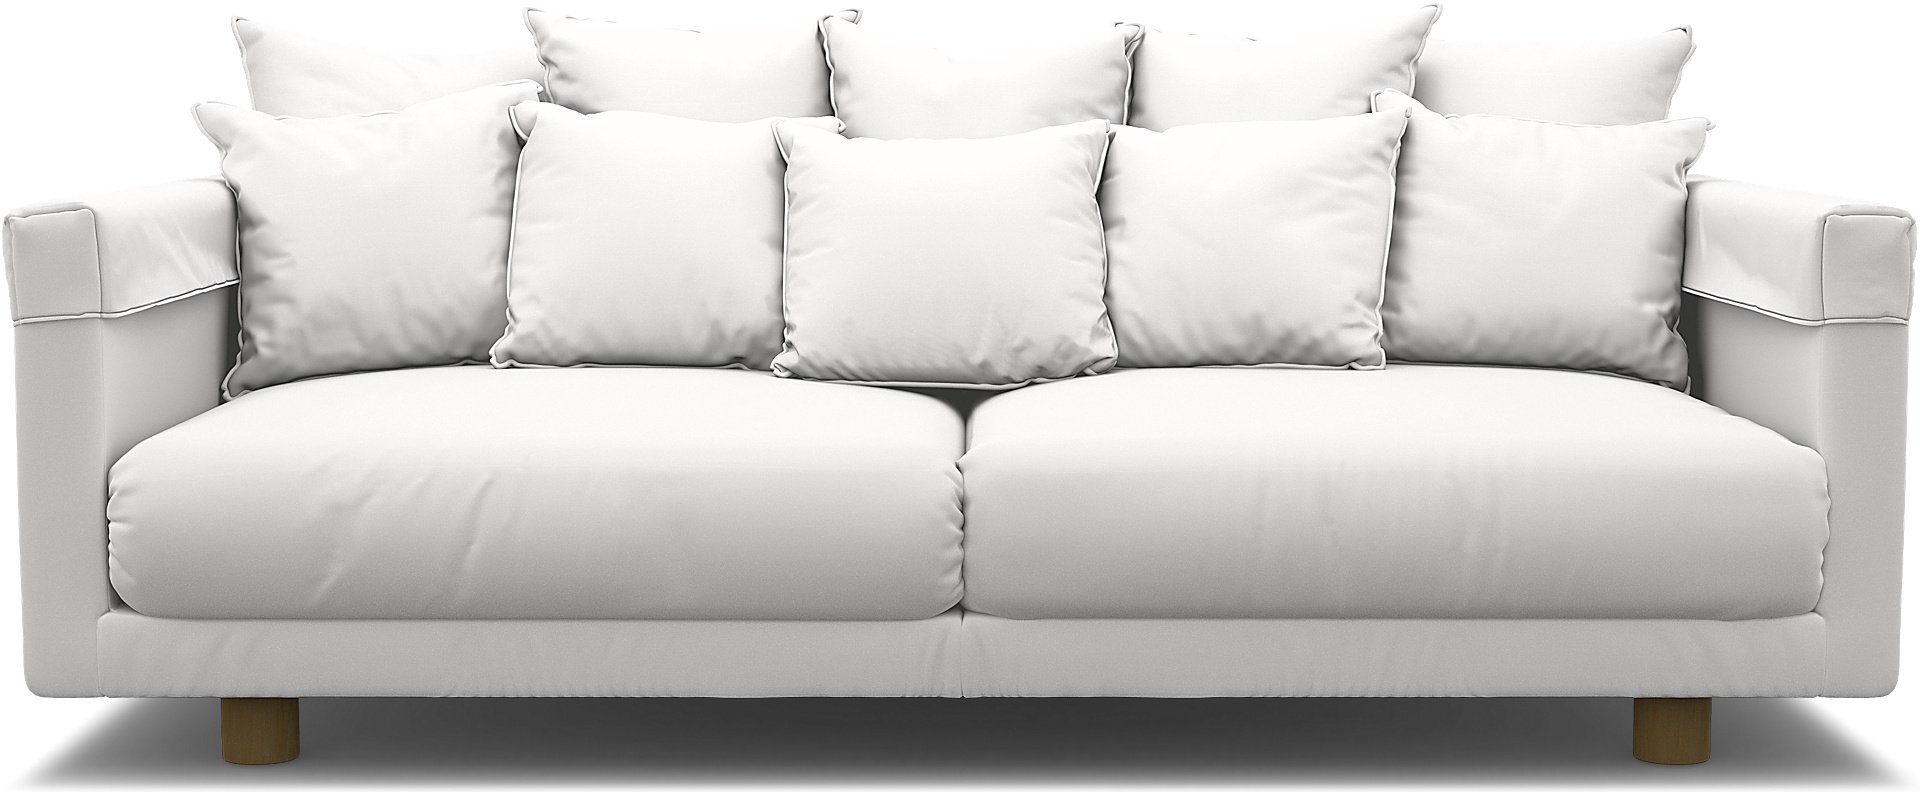 IKEA - Stockholm 2017 3 Seater Sofa Cover, Absolute White, Cotton - Bemz